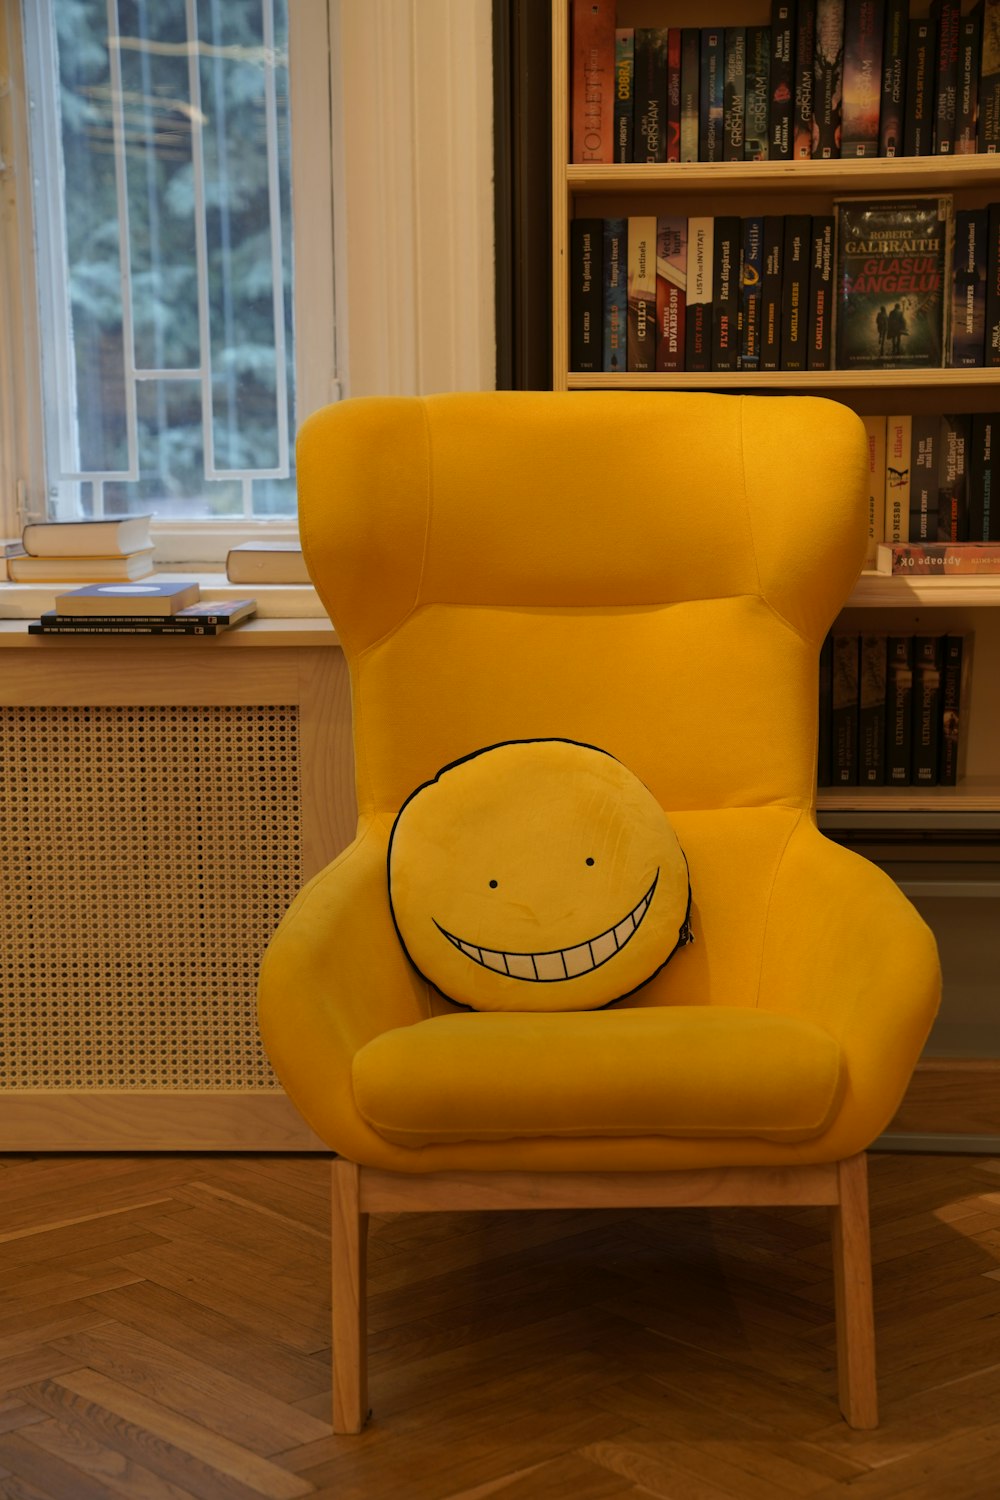 a yellow chair in front of a bookshelf